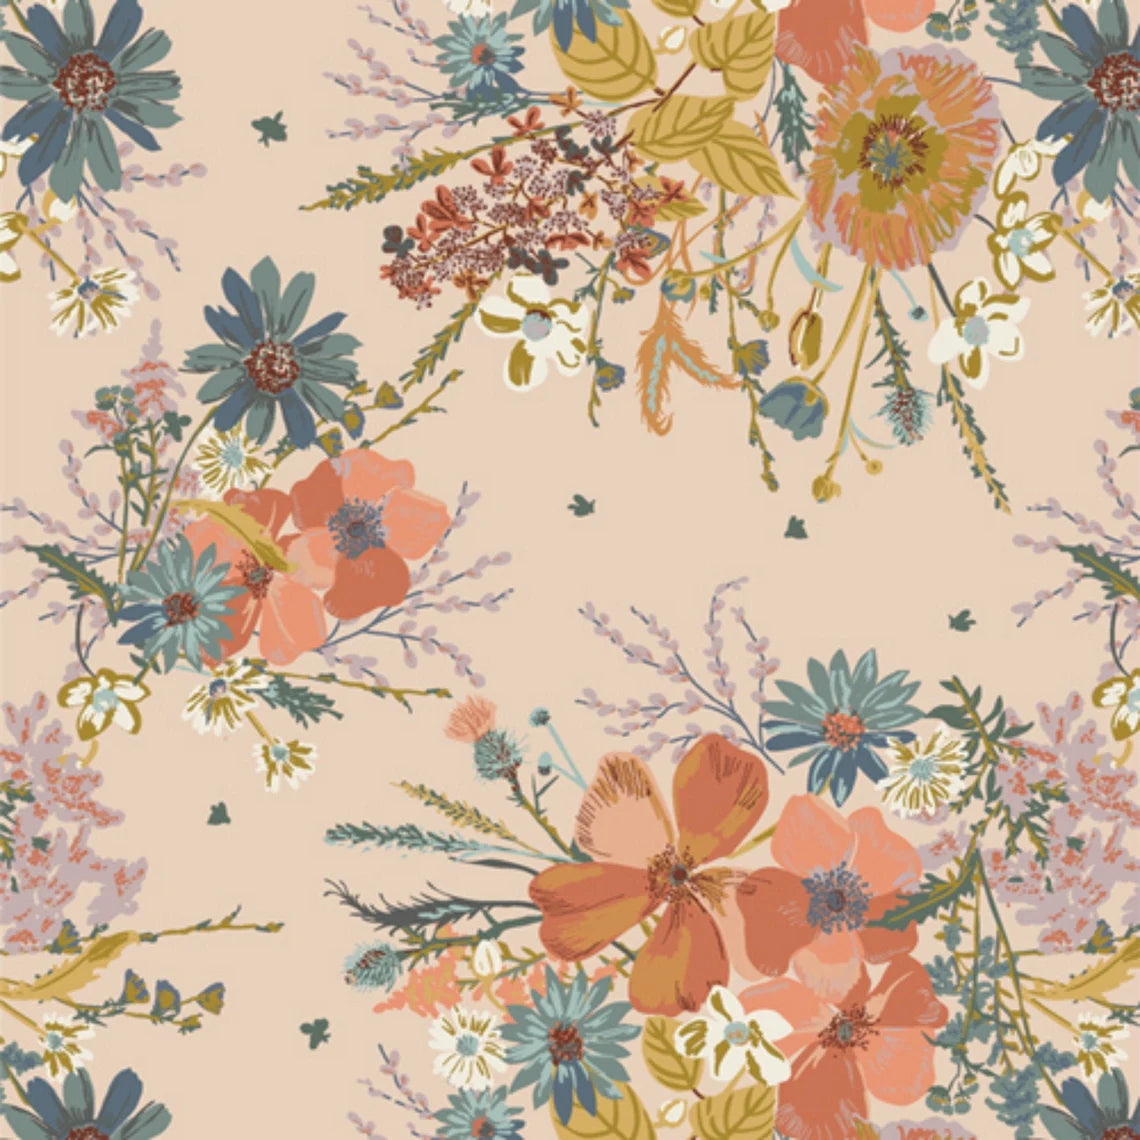 Spirited Floral on Peach ♥ Large Scale